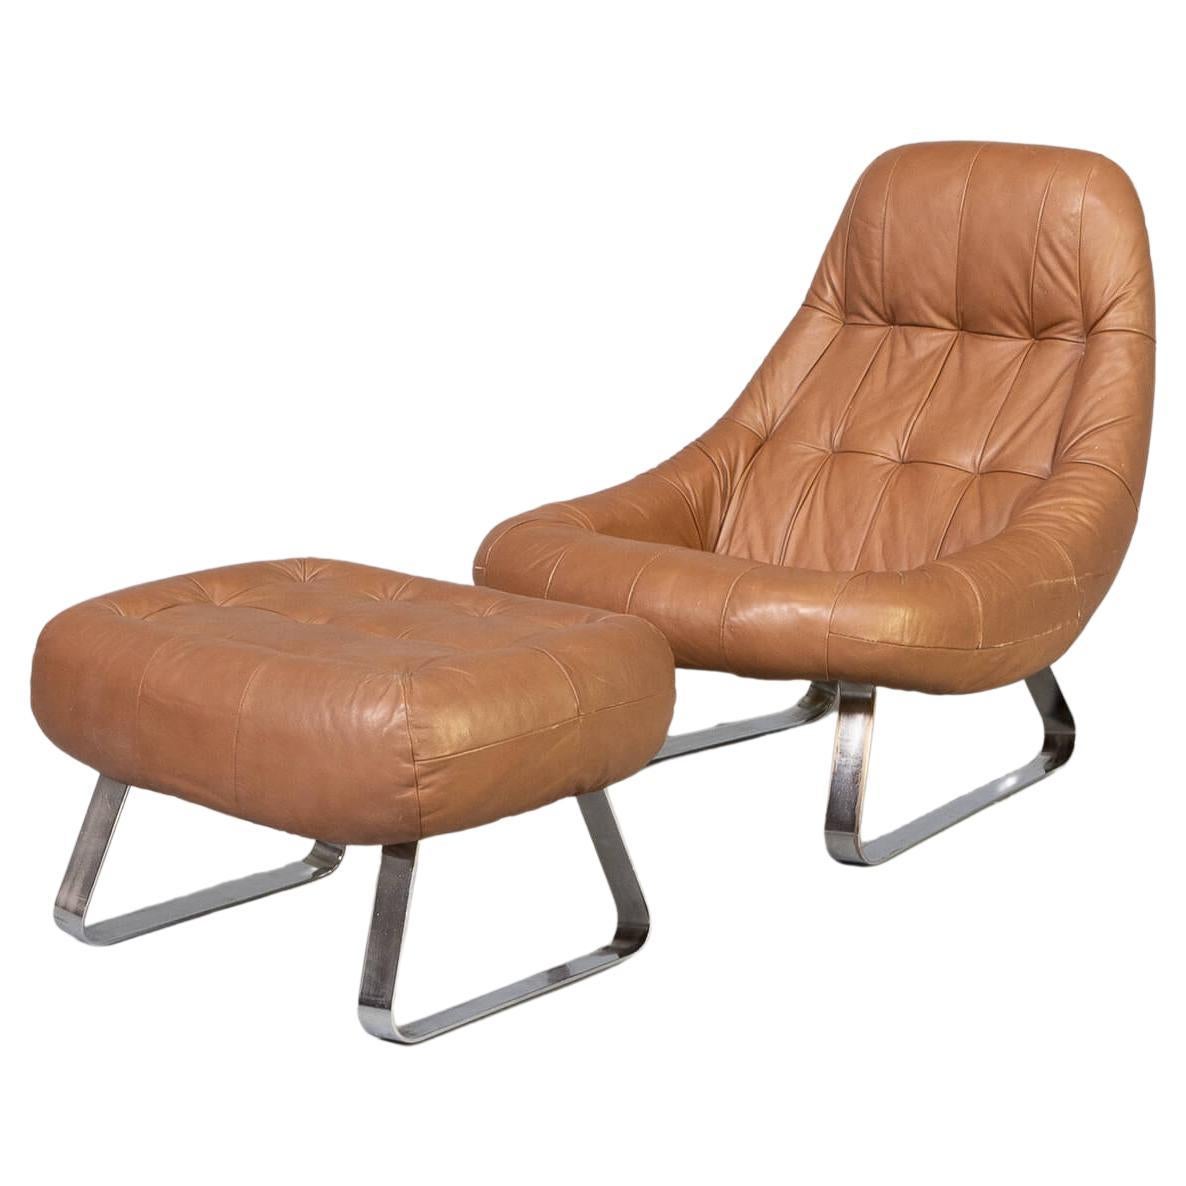 70s Percival Lafer “Earth Chair” Collection Lounge Fauteuil and Hocker For Sale